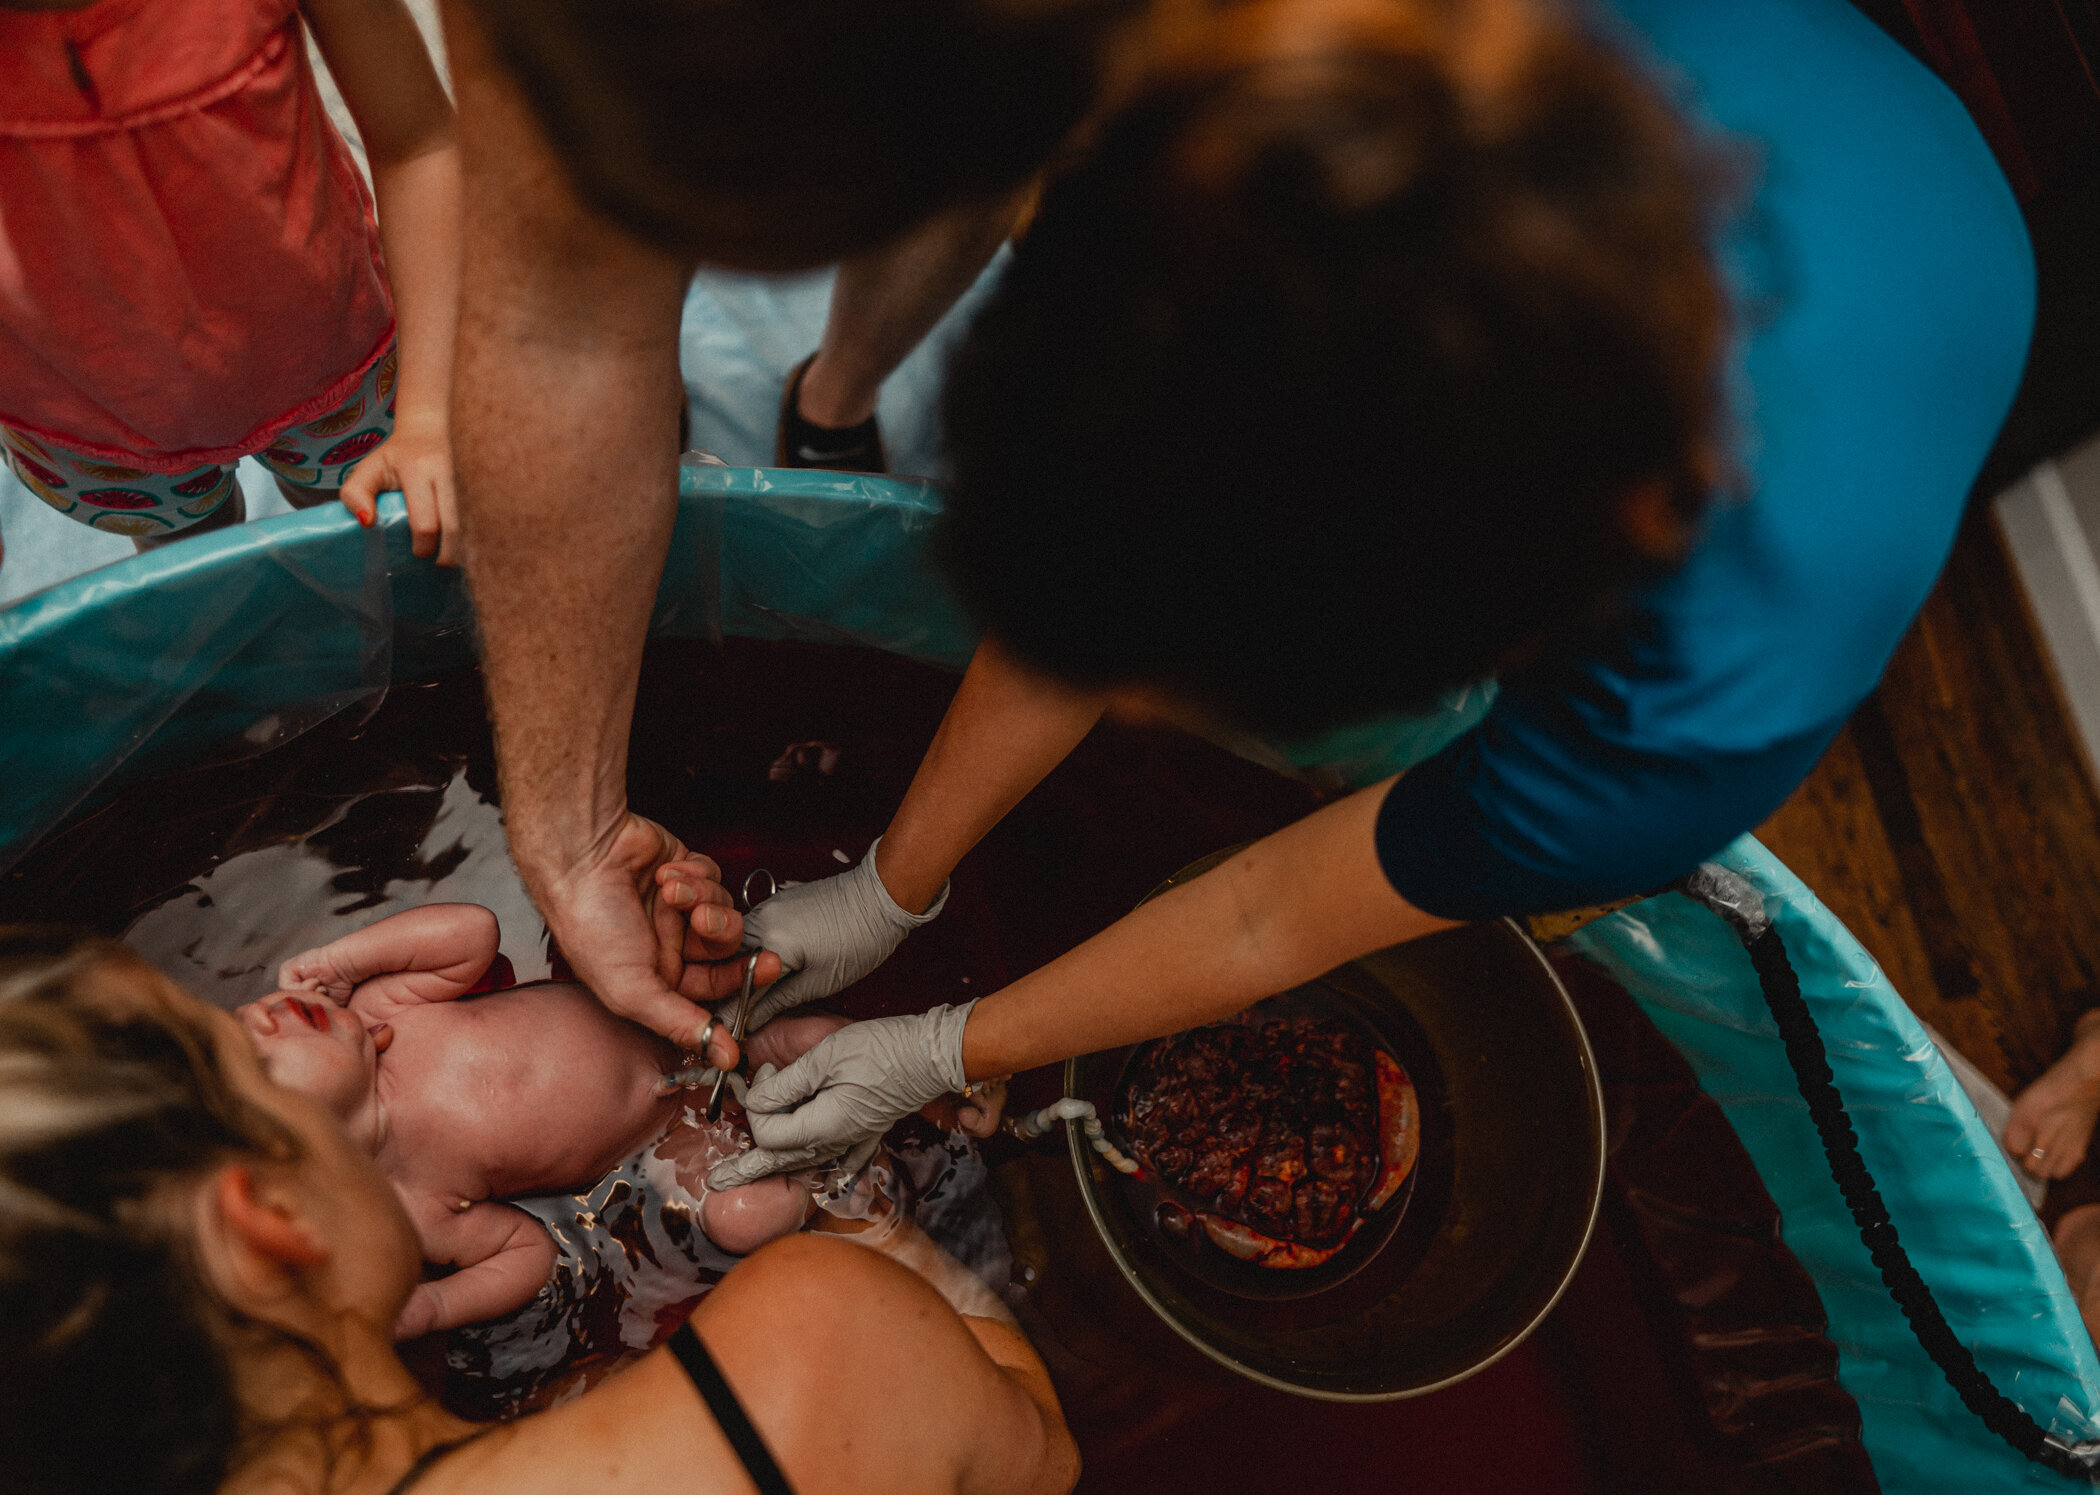 Dad is cutting the umbilical cord after a home water birth in Great Falls, VA with Premier Birth Center. Baby is still floating in the birth tub with his placenta in a bowl next to him